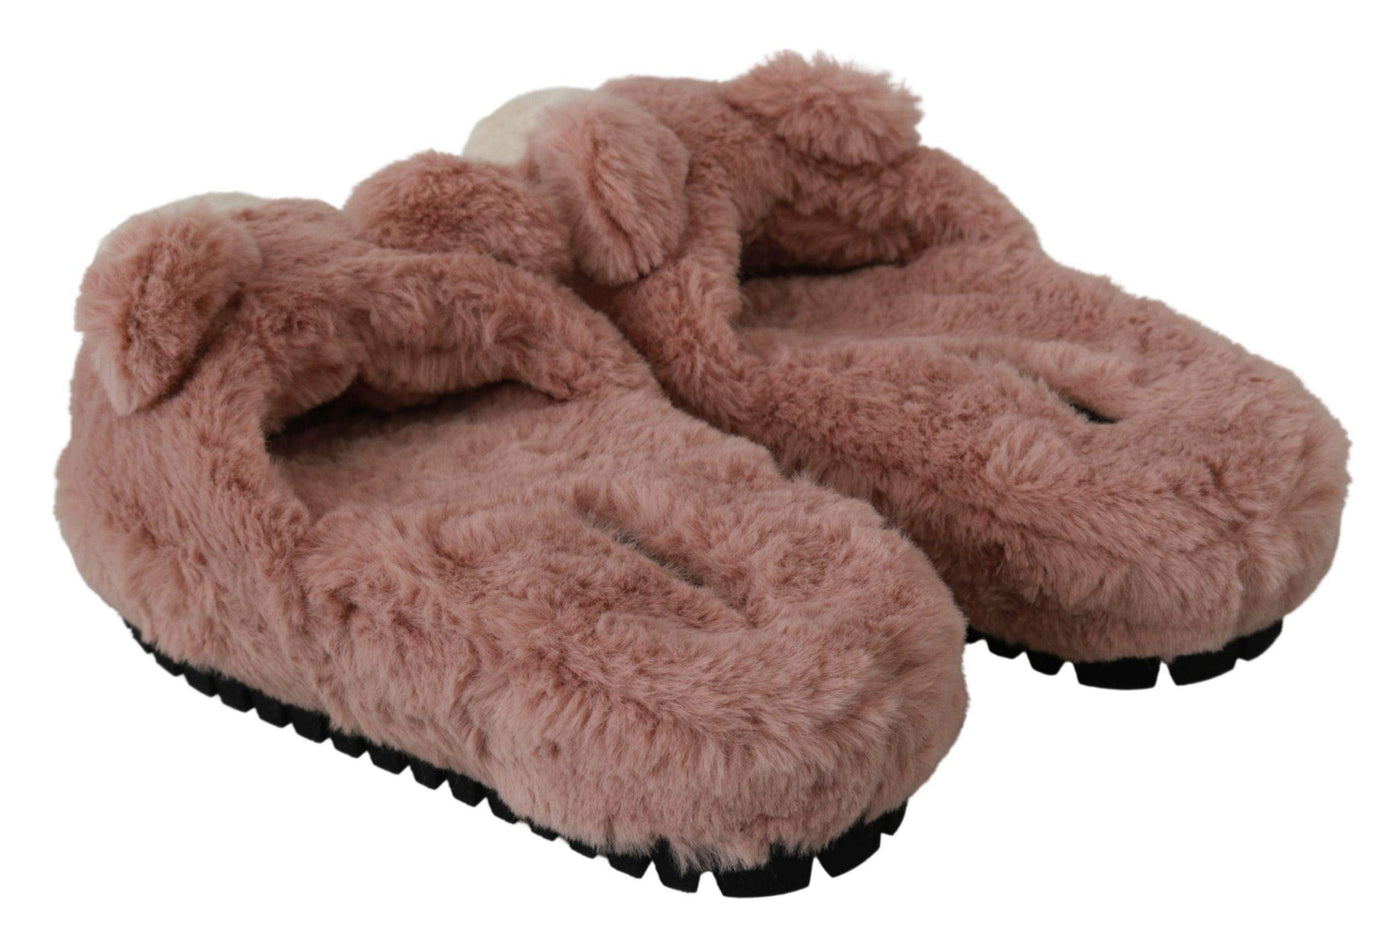 Dolce & Gabbana Pink Bear House Slippers Sandals Shoes #women, Brand_Dolce & Gabbana, Catch, Category_Shoes, Dolce & Gabbana, EU35/US4.5, EU36/US5.5, feed-agegroup-adult, feed-color-pink, feed-gender-female, feed-size-US4.5, Flat Shoes - Women - Shoes, Gender_Women, Kogan, Pink, Shoes - New Arrivals at SEYMAYKA